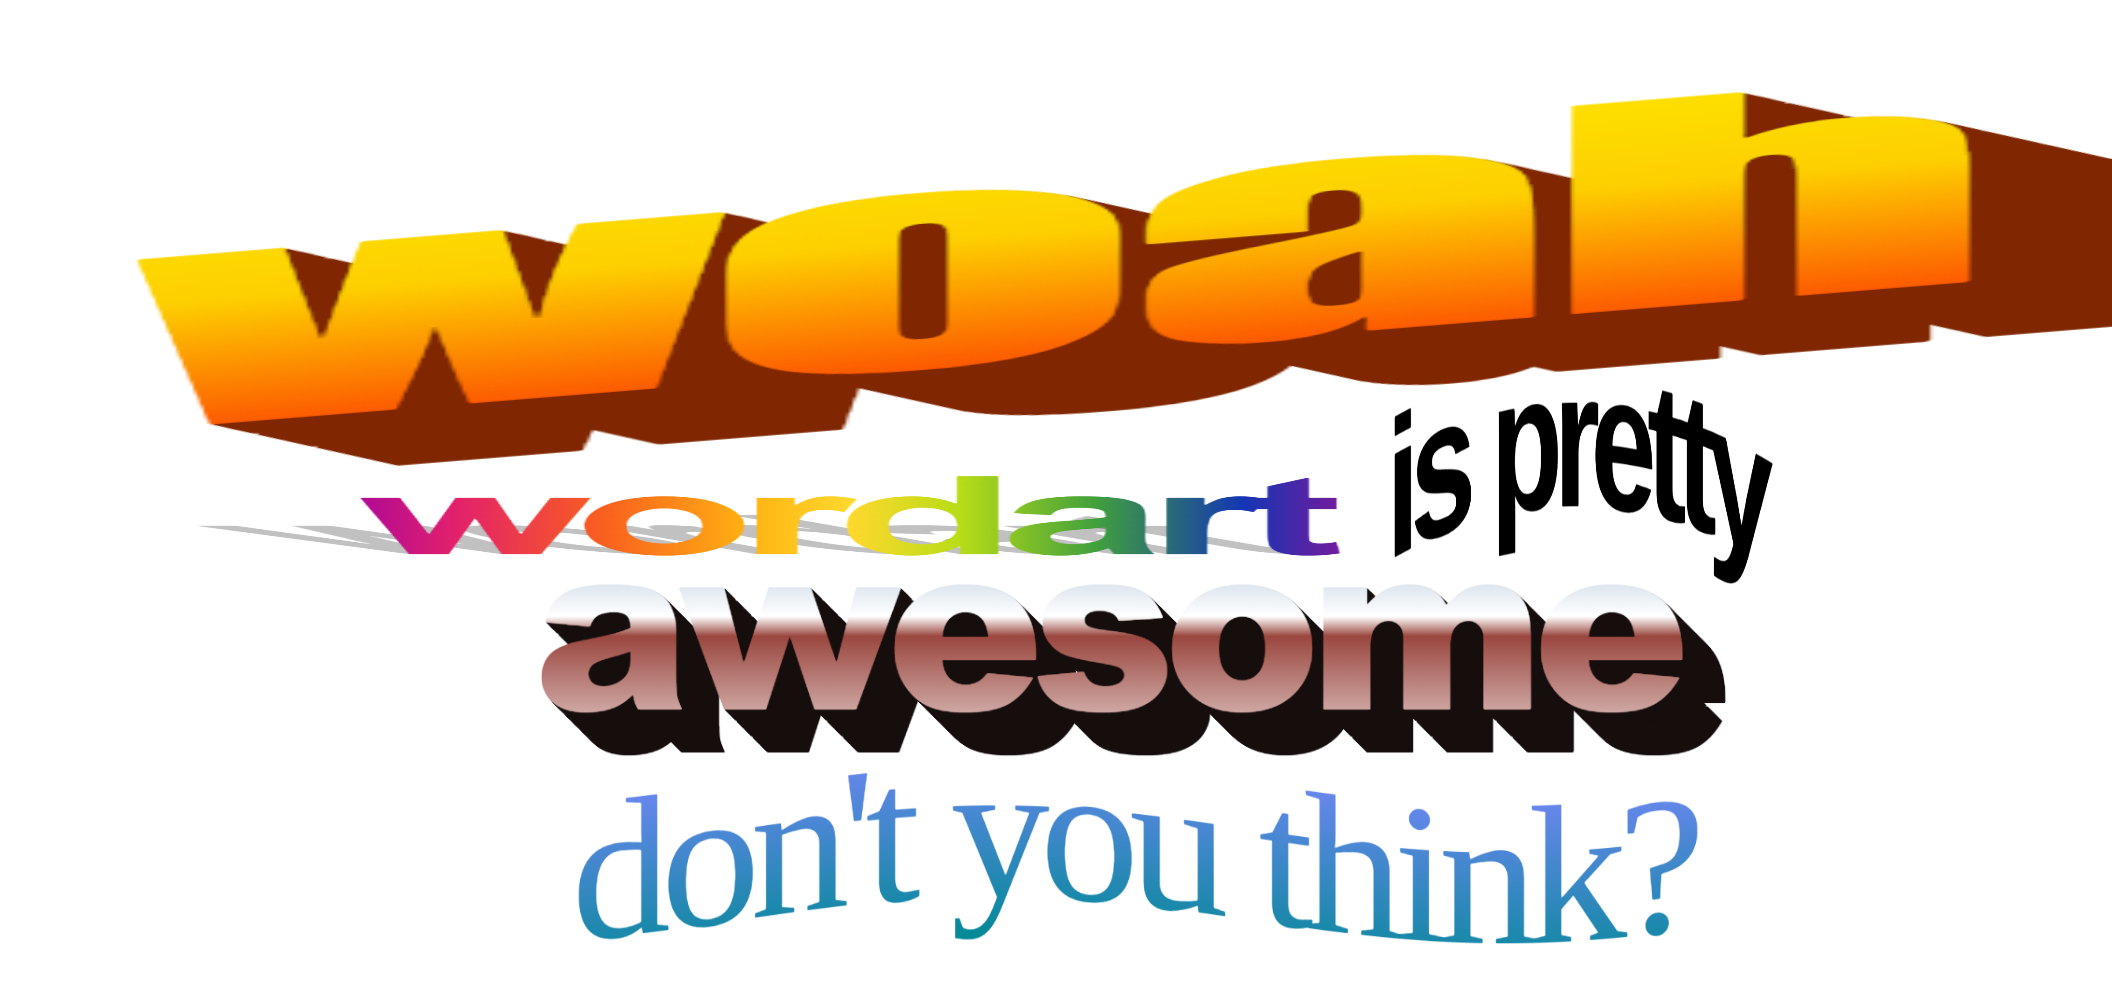 WOAH wordart is pretty awesome don't you think?